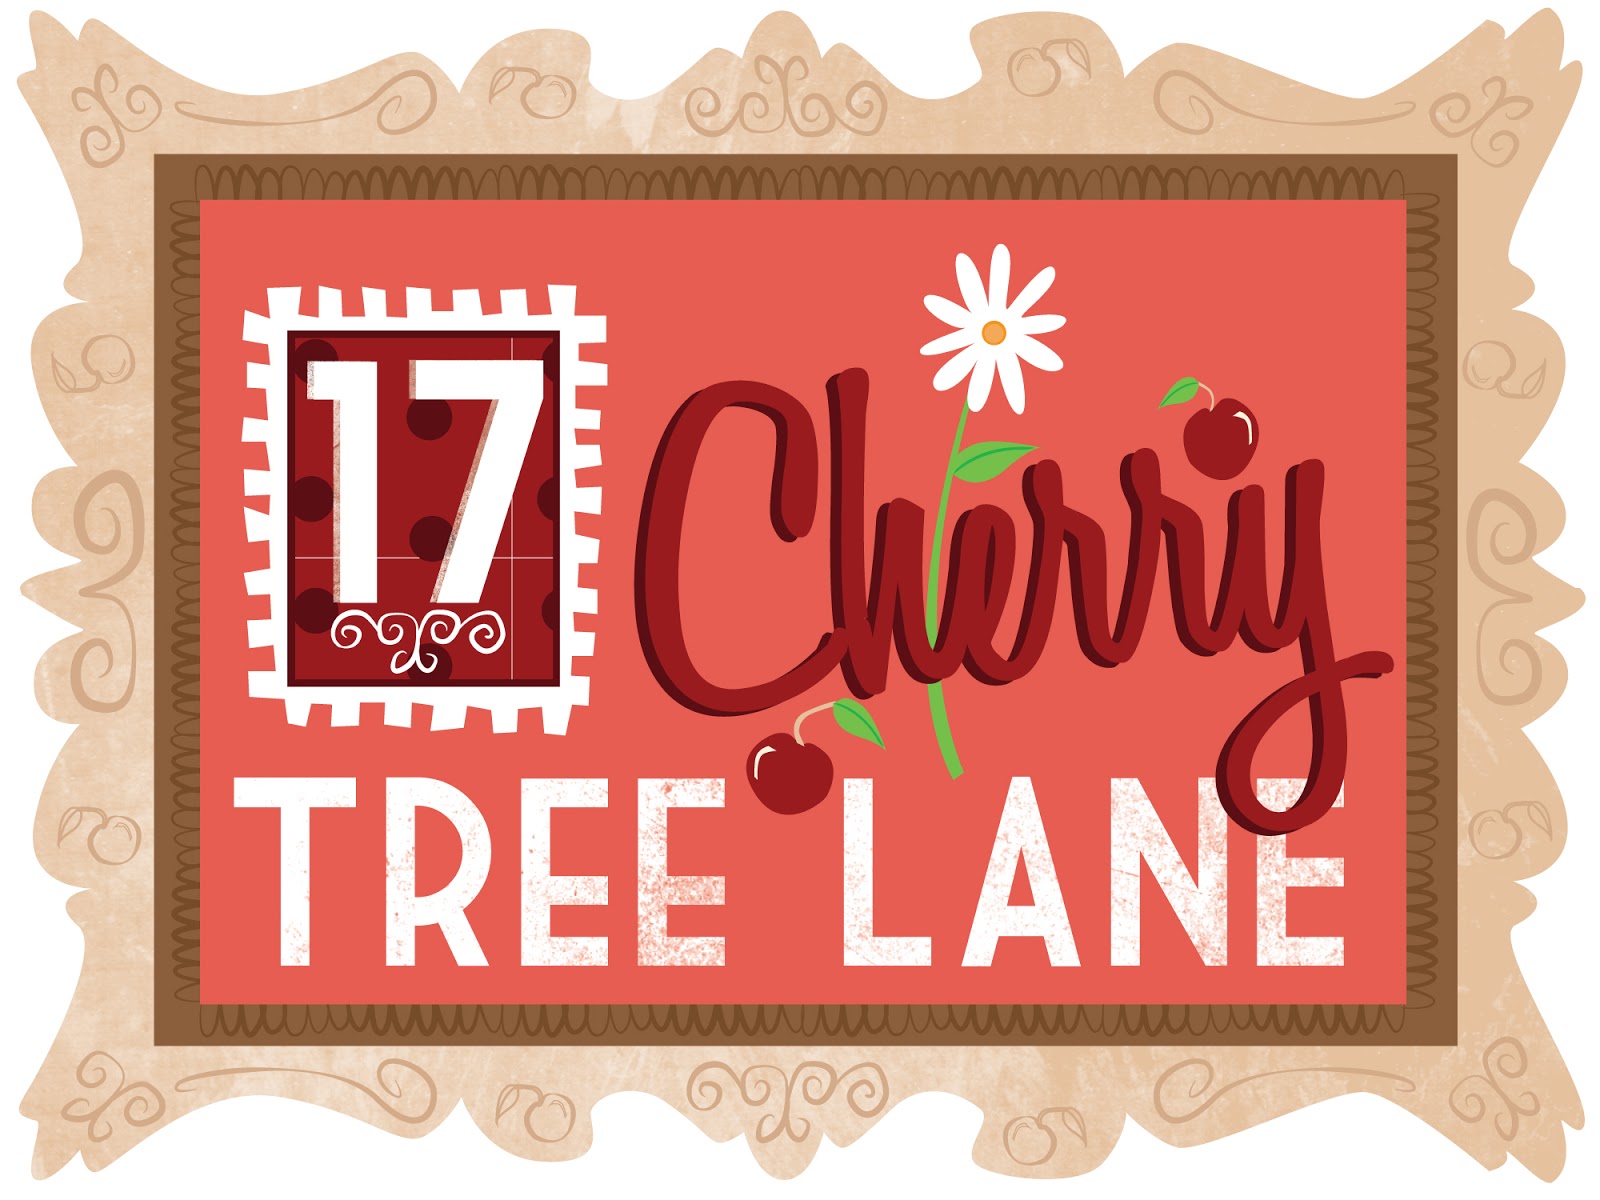 Nice Images Collection: Cherry Tree Lane Desktop Wallpapers